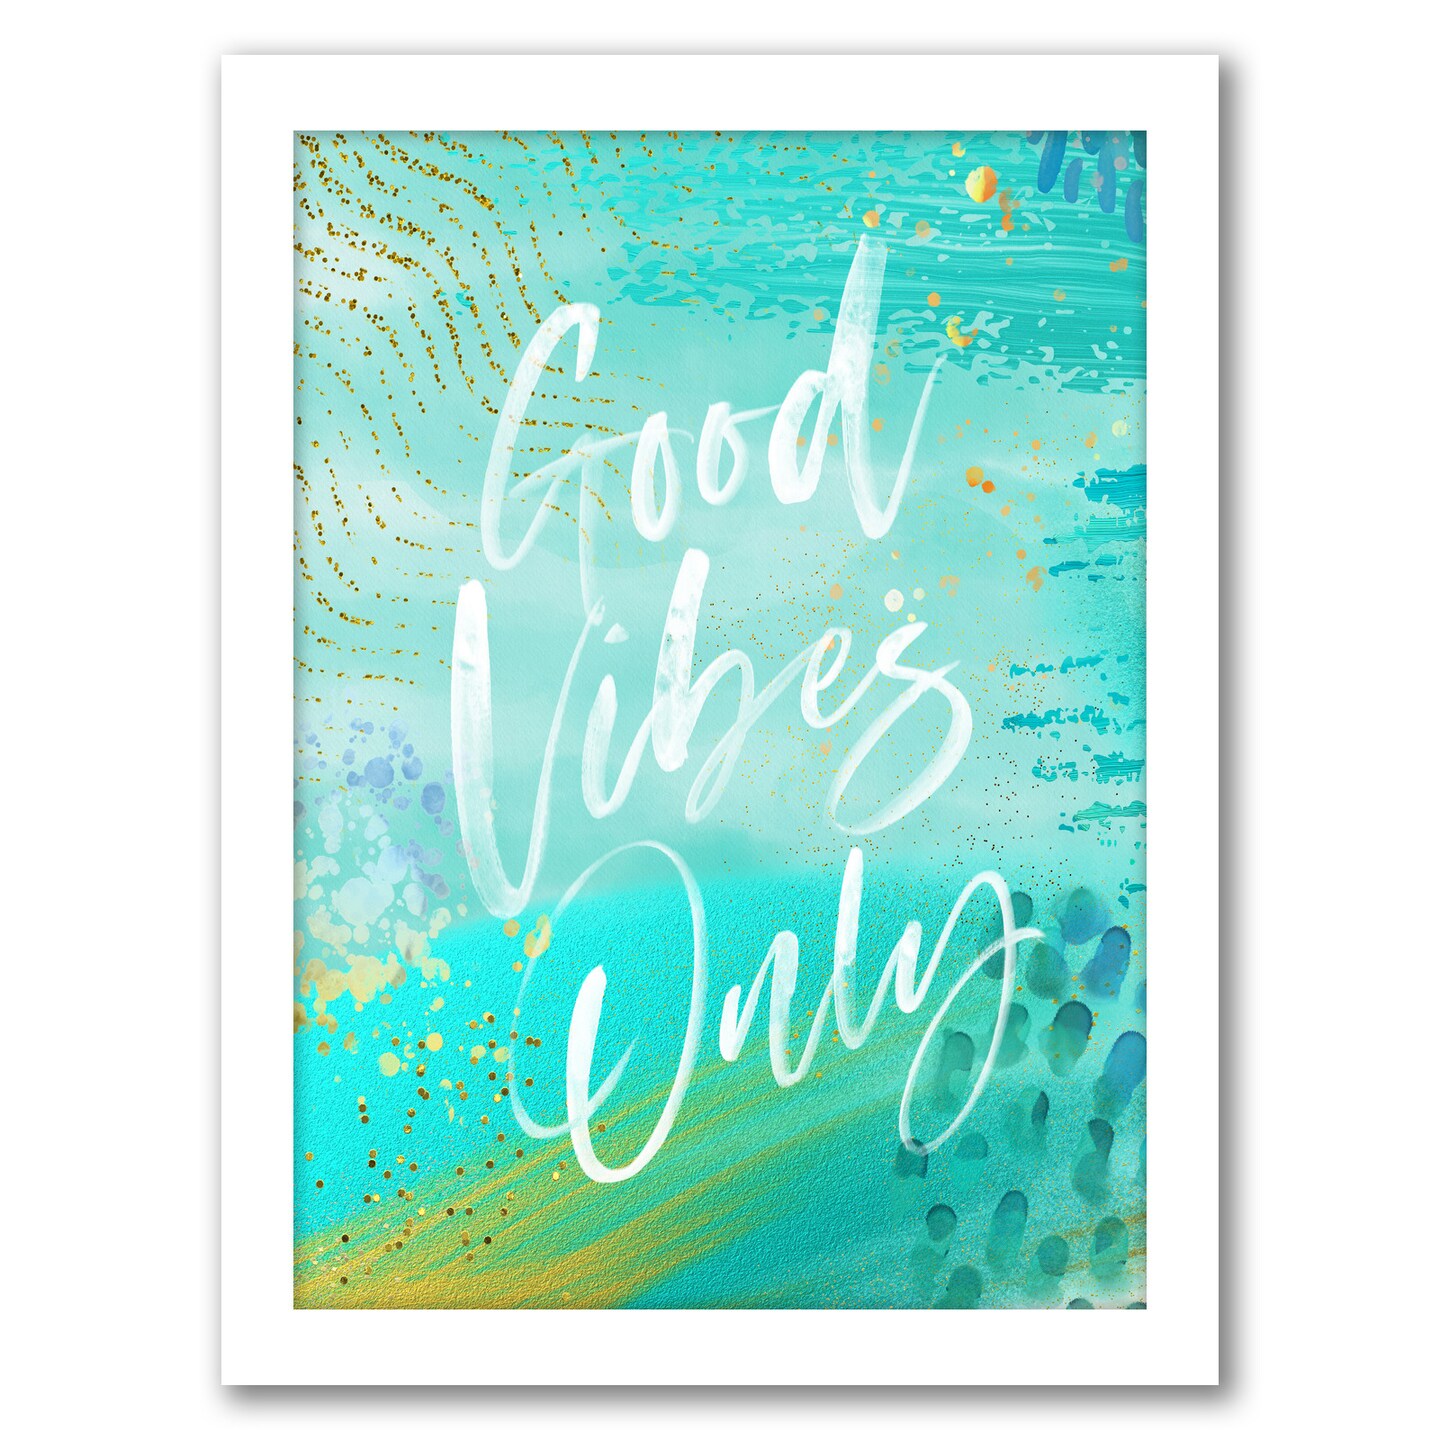 Good Vibes Only by Elena David Frame  - Americanflat